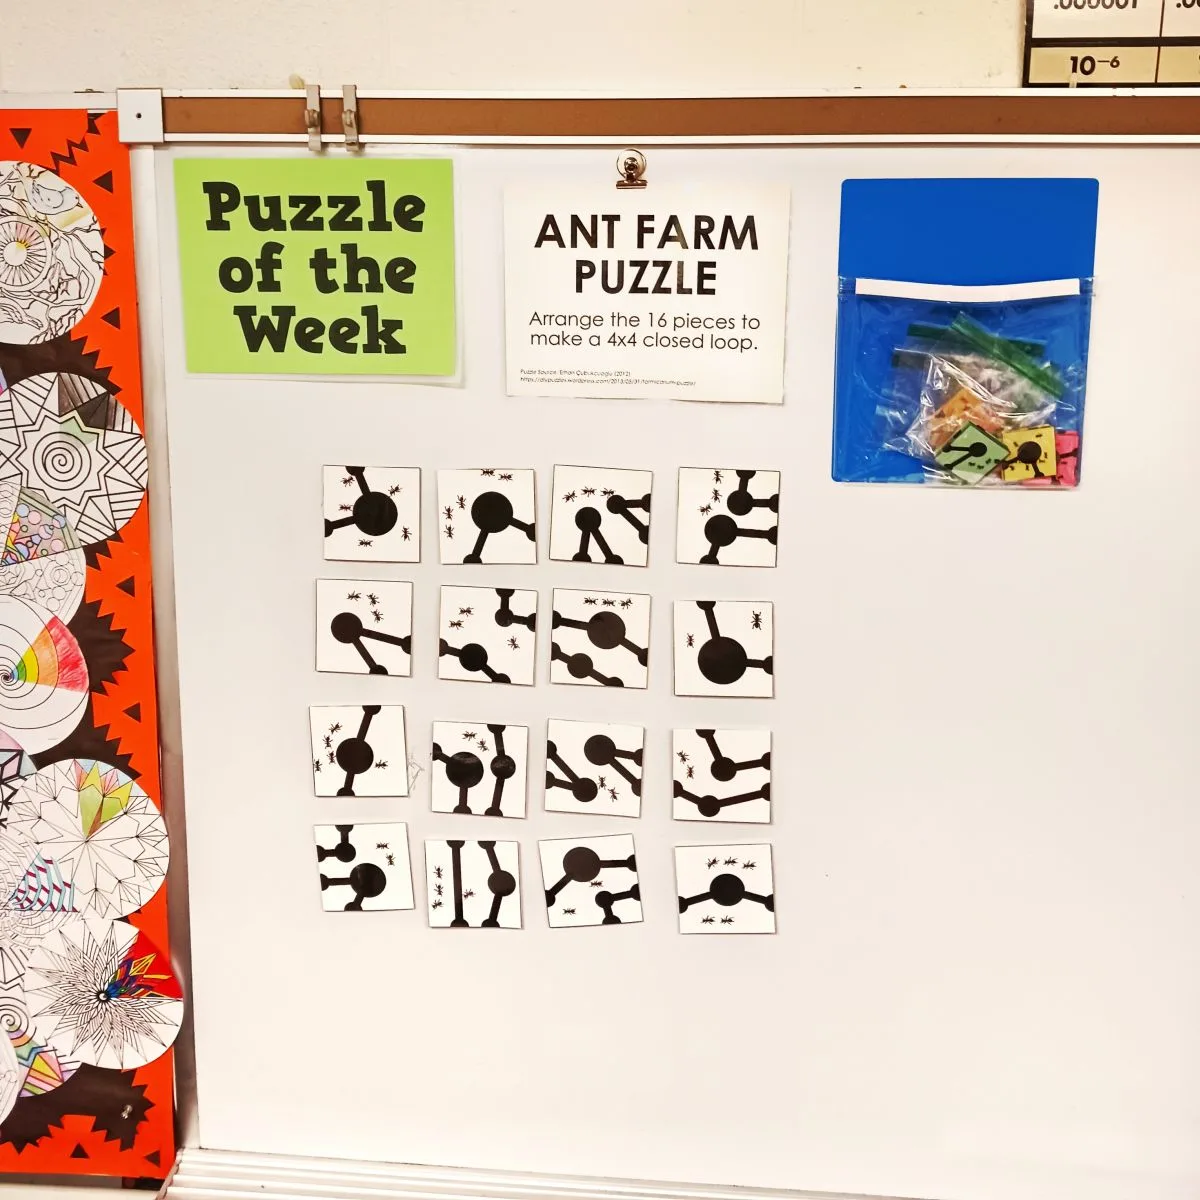 ant farm puzzle hanging on dry erase board in classroom next to sign which reads "puzzle of the week" 